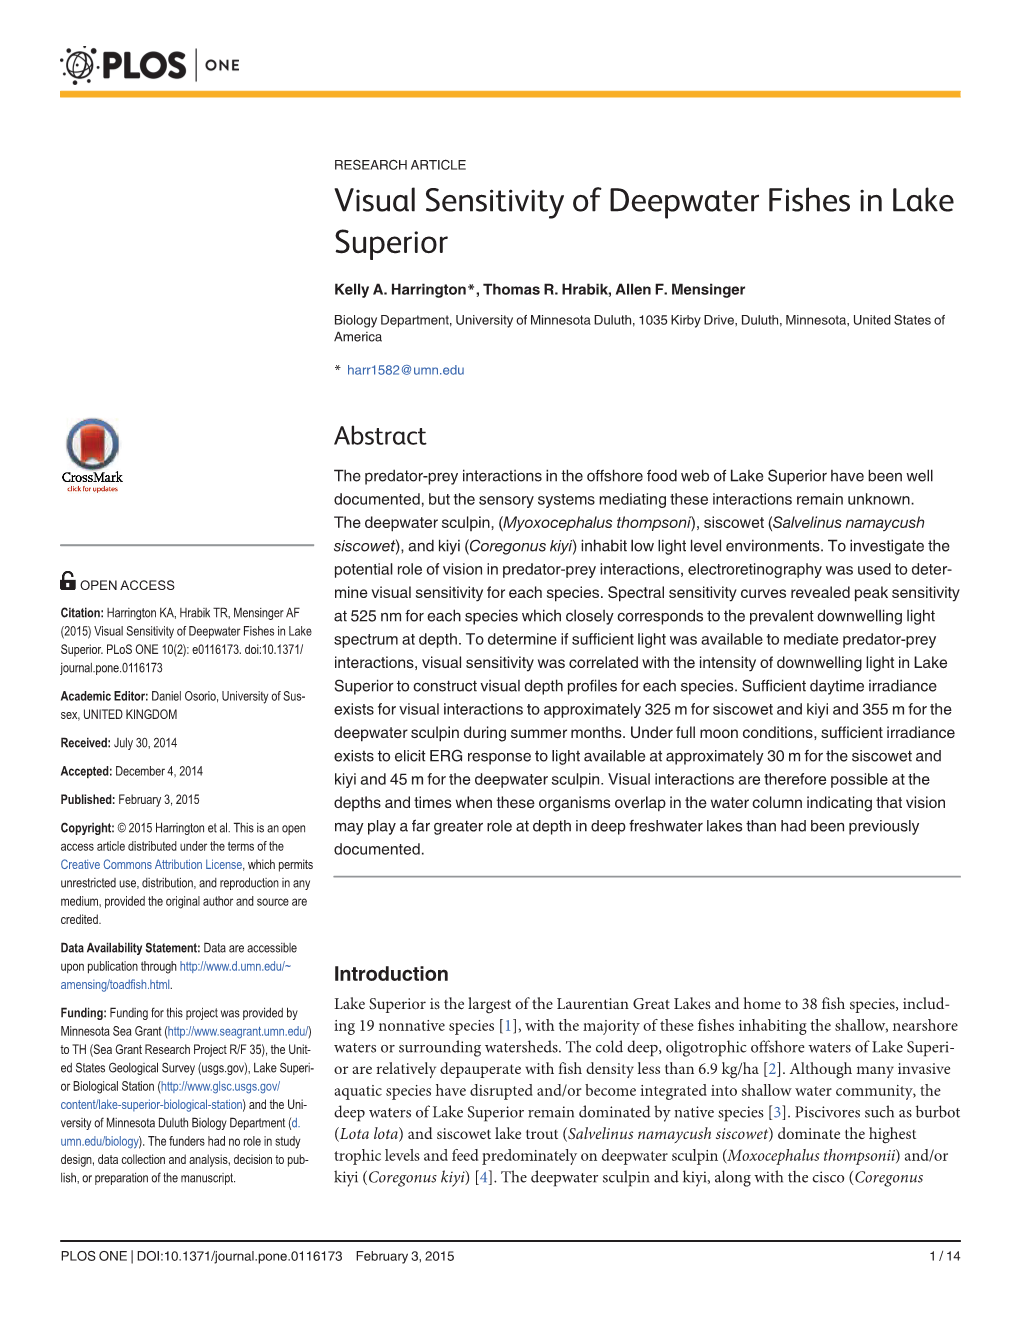 Visual Sensitivity of Deepwater Fishes in Lake Superior